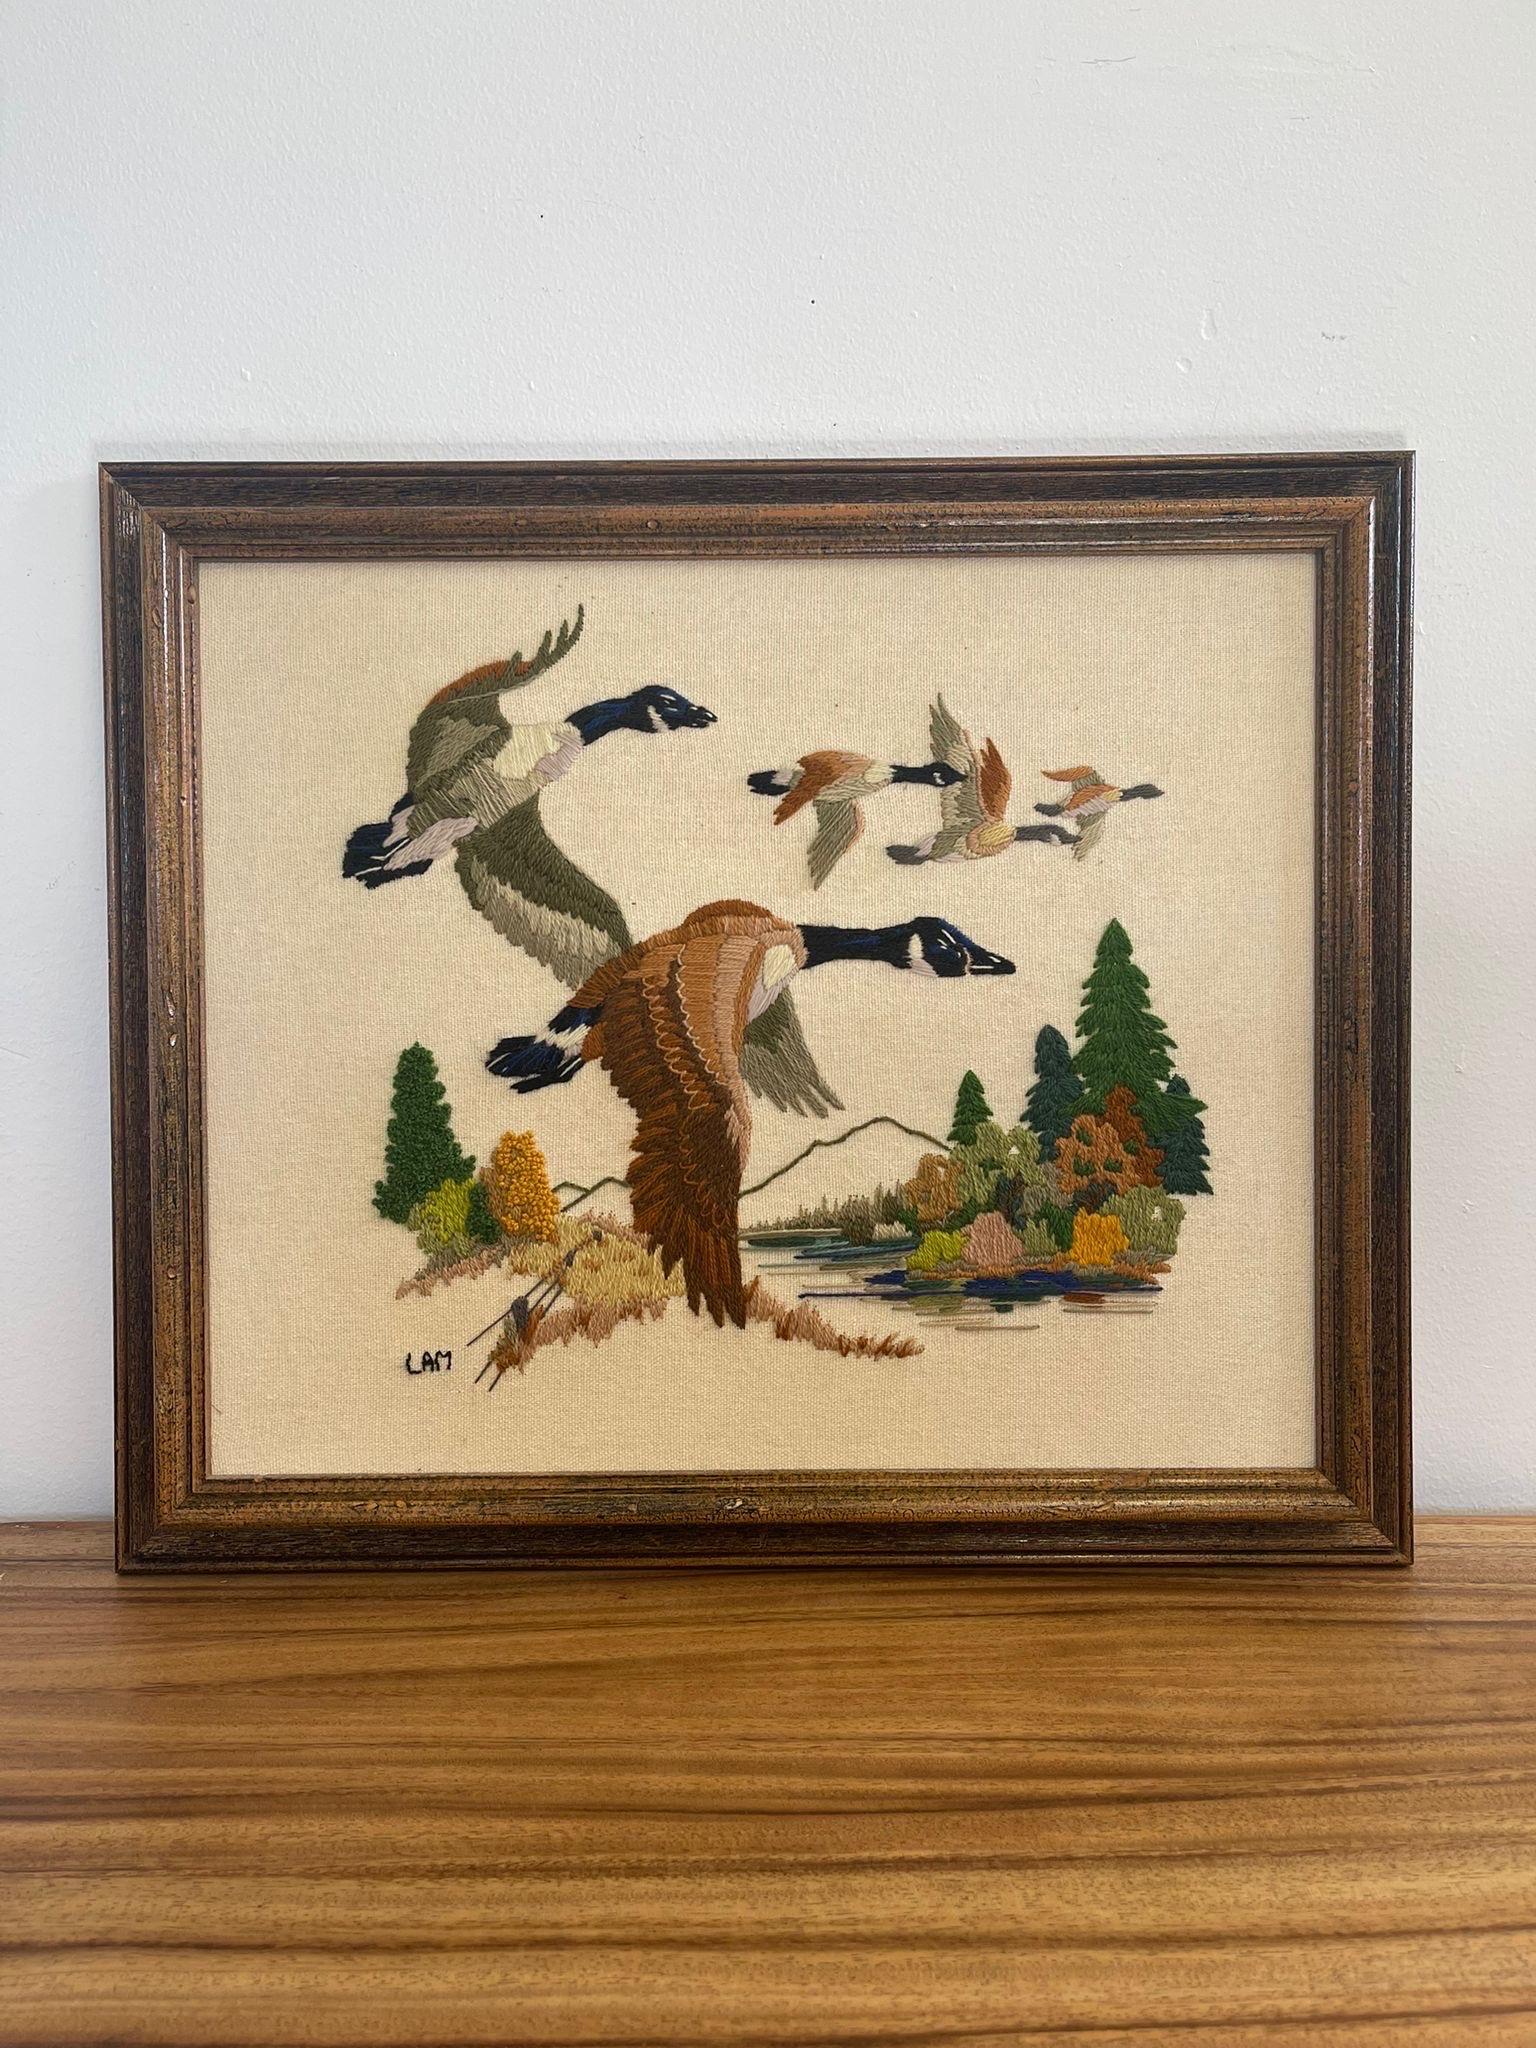 This Artwork was from an embroidery kit in 1978 titled “ Autumn Flight “ from sunset Stitchery. Image of geese flying over forests. Vintage Condition Consistent with Age as Pictured.

Dimensions. 23 W ; 1/4 D ; 30 H